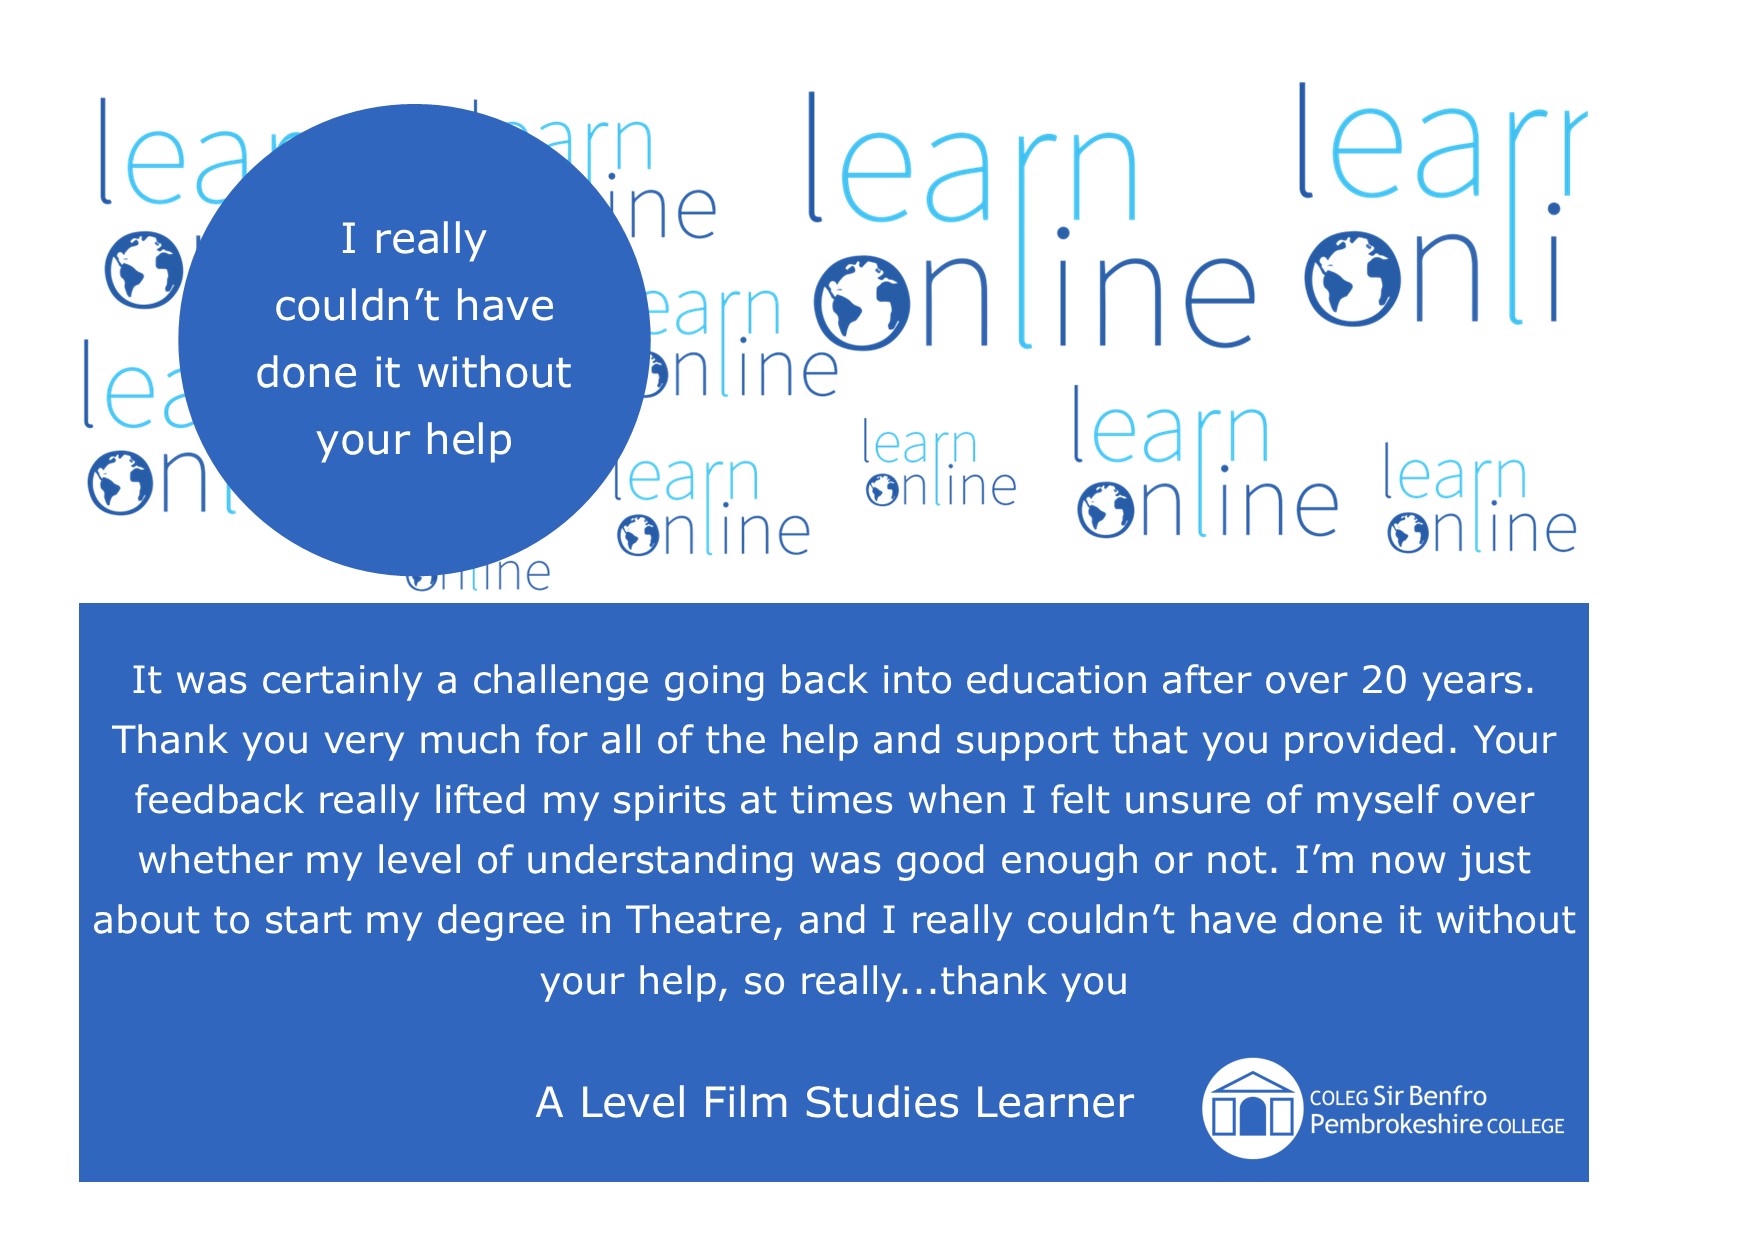 LearnOnline Testimonial - 'I really couldn’t have done it without your help' It was certainly a challenge going back into education after over 20 years. Thank you very much for all of the help and support that you provided. Your feedback really lifted my spirits at times when I felt unsure of myself over whether my level of understanding was good enough or not. I’m now just about to start my degree in Theatre, and I really couldn’t have done it without your help, so really...thank you A Level Film Studies Learner